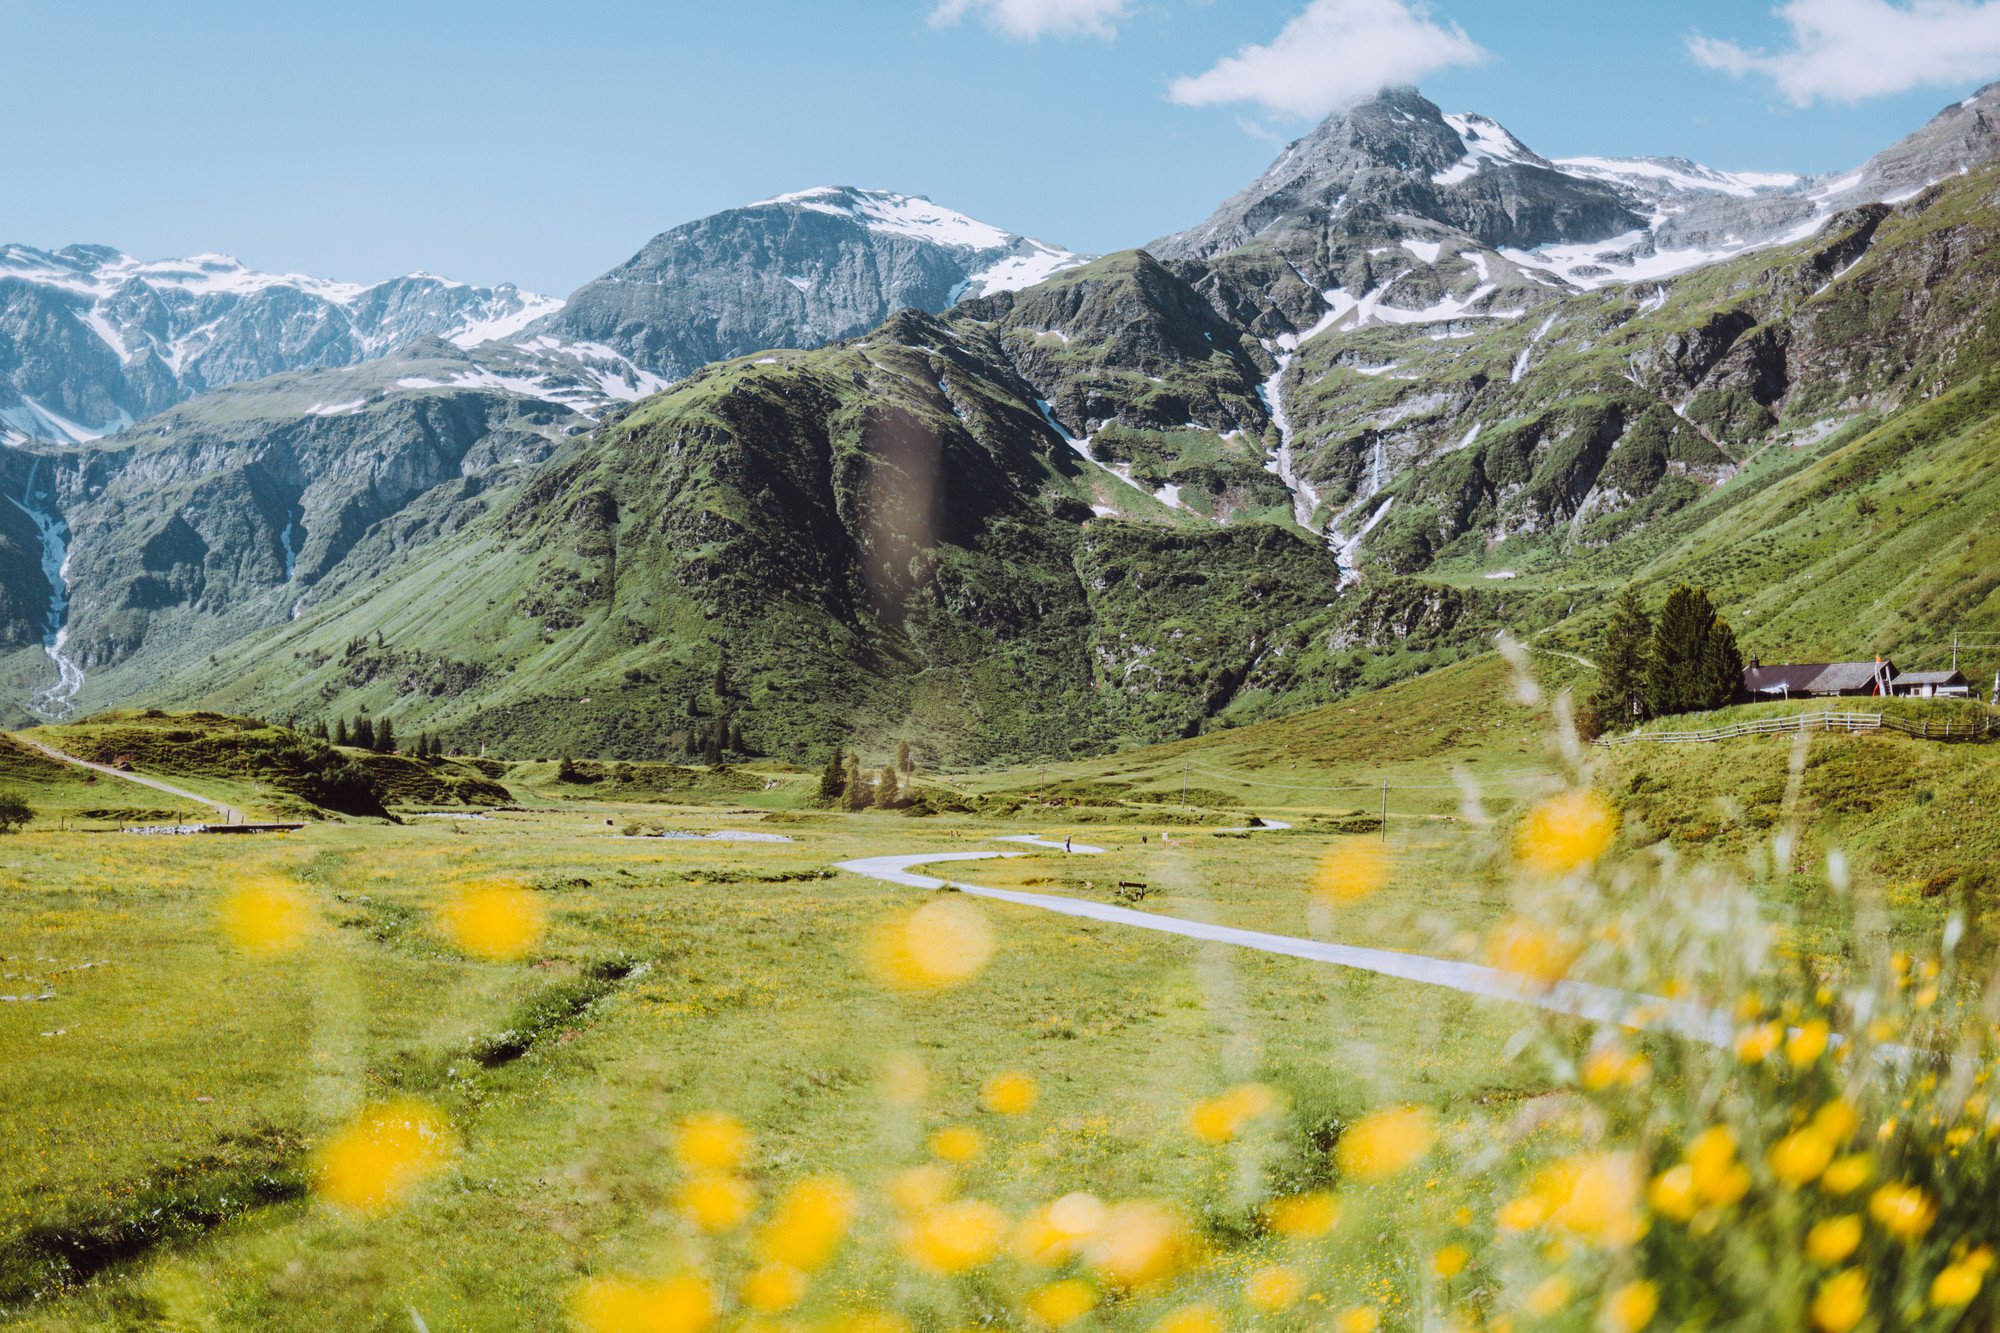 Idyllic Gastein Valley with flowers and scenic mountains